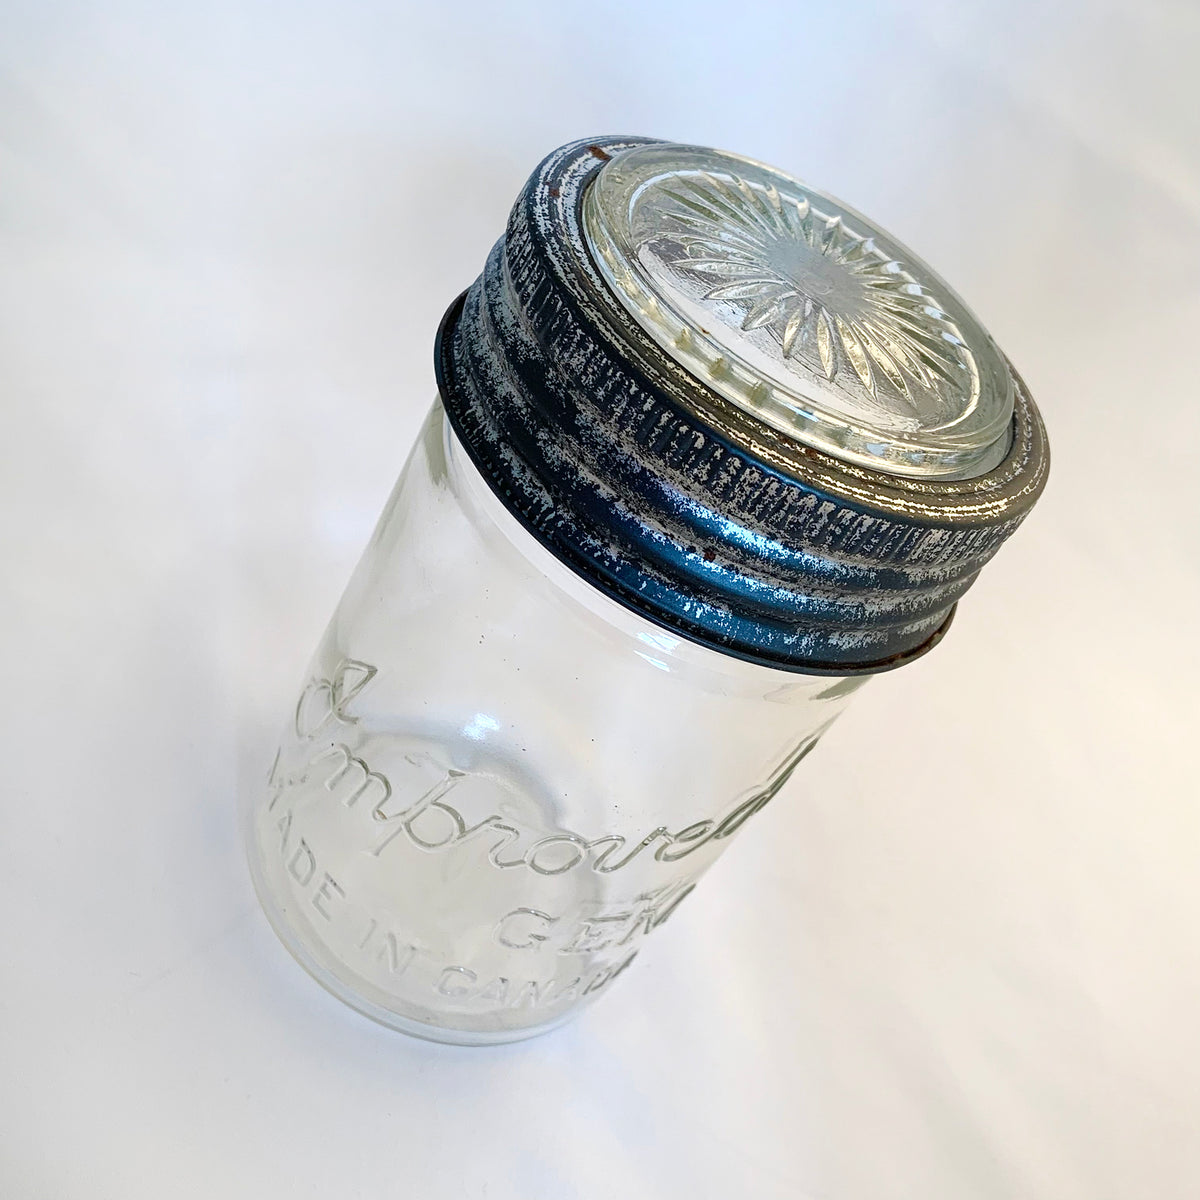 Company makes new canning lids available for gem jars